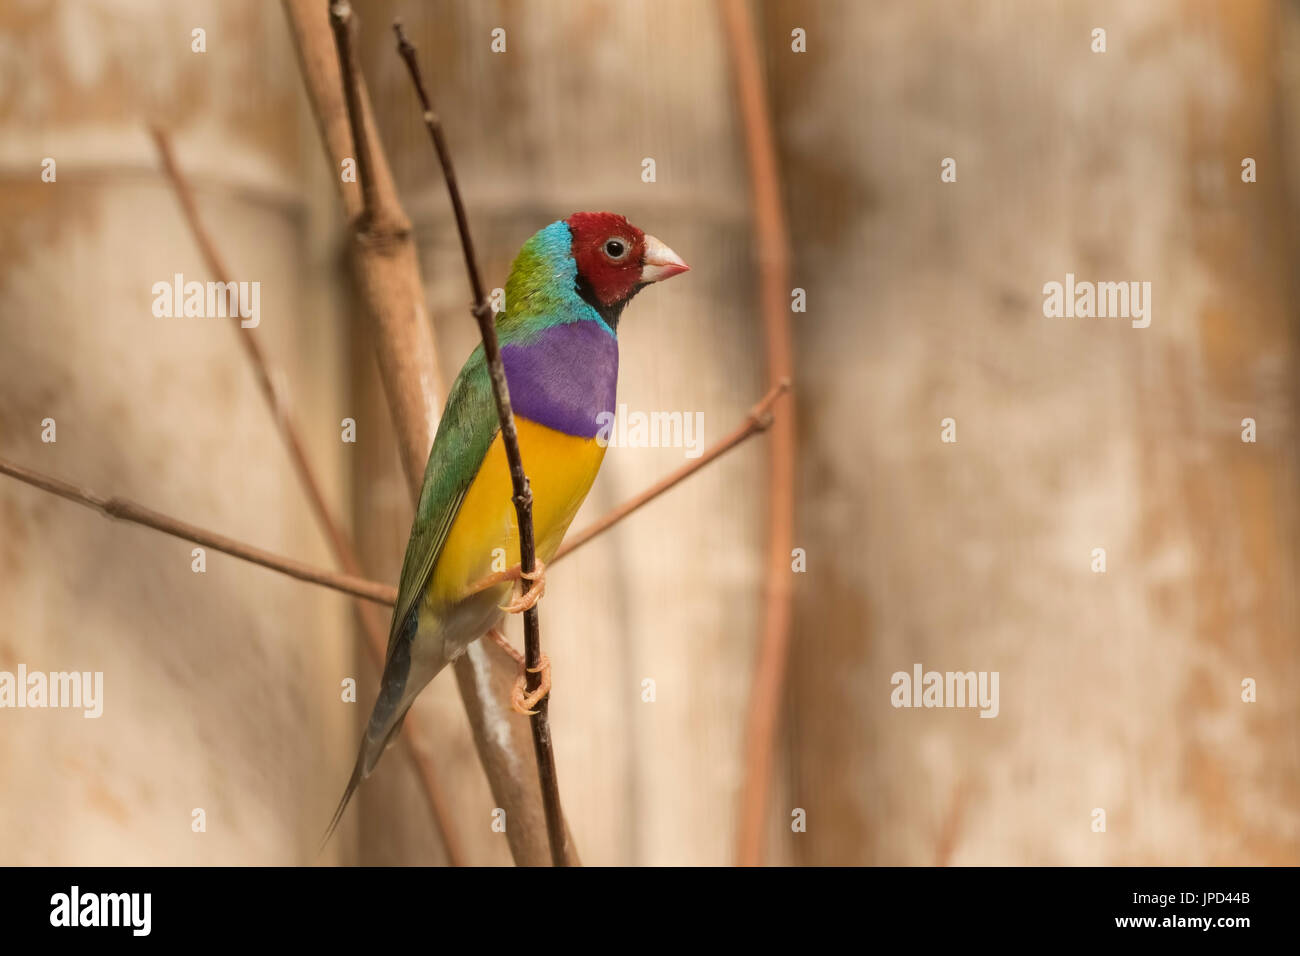 Closeup portrait of a colorful Gouldian finch (Erythrura gouldiae) bird perched on a branch Stock Photo